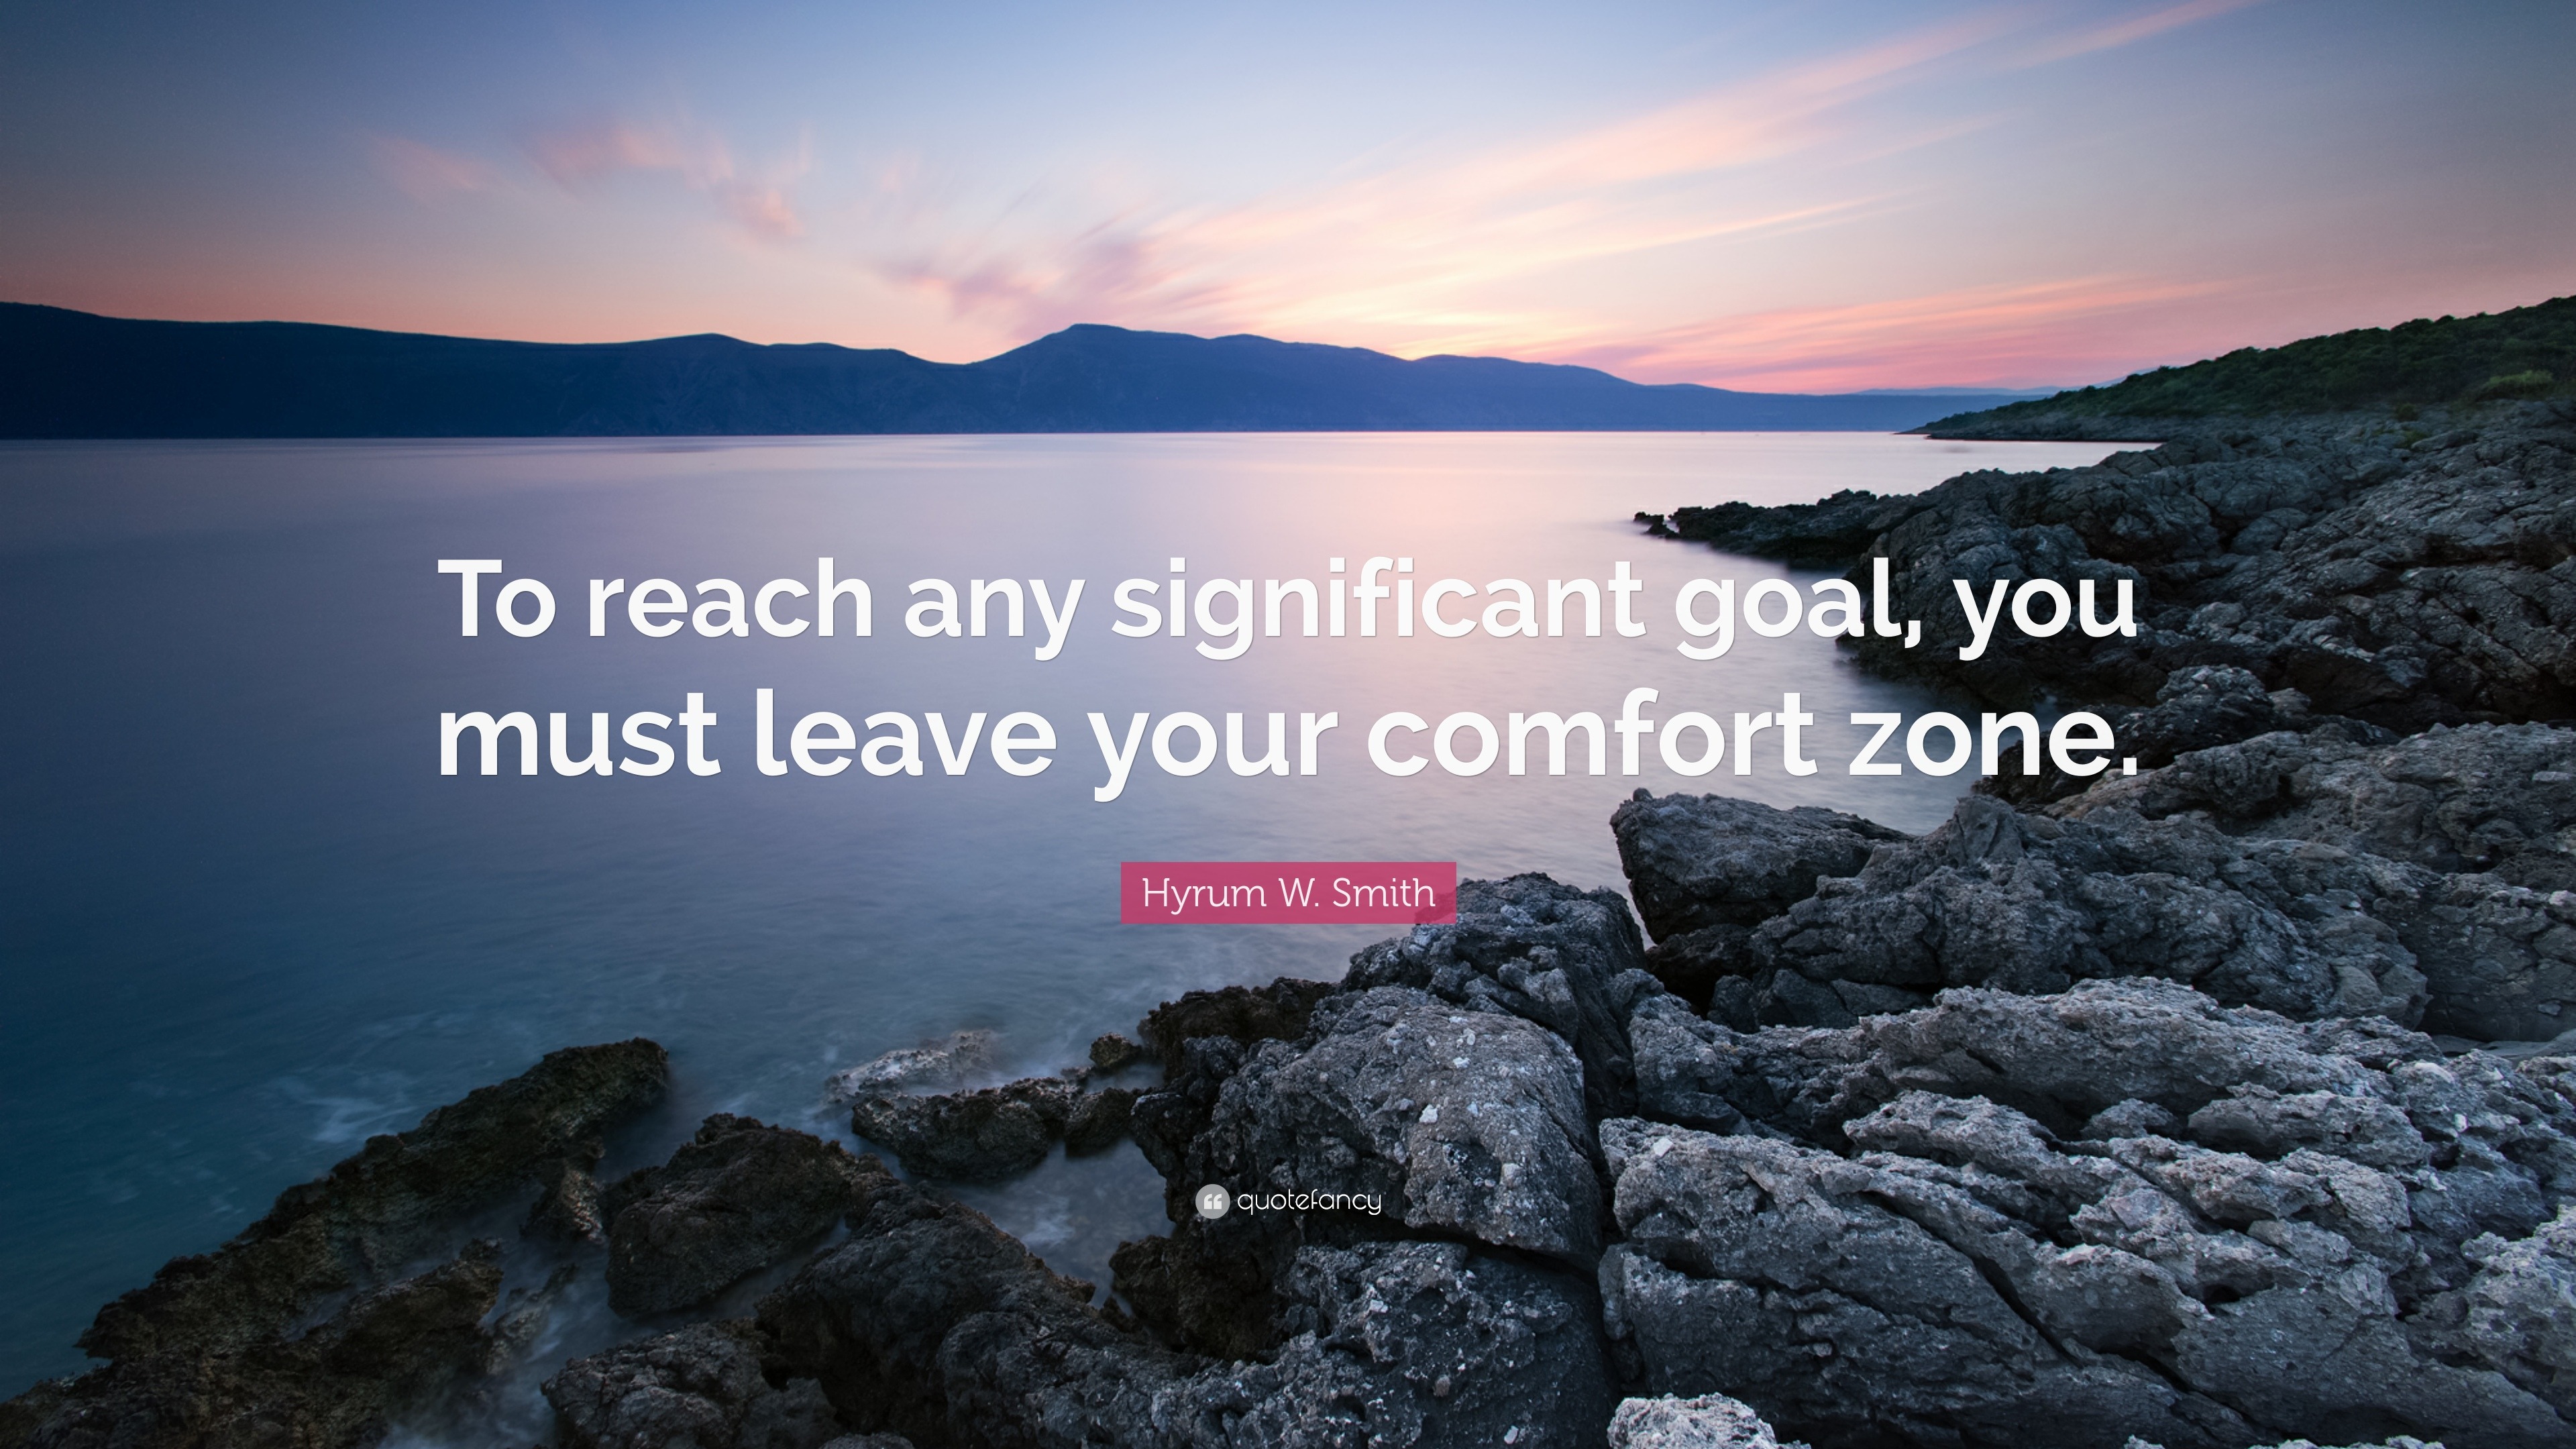 What is Your Comfort Zone, and Why Should You Leave It?